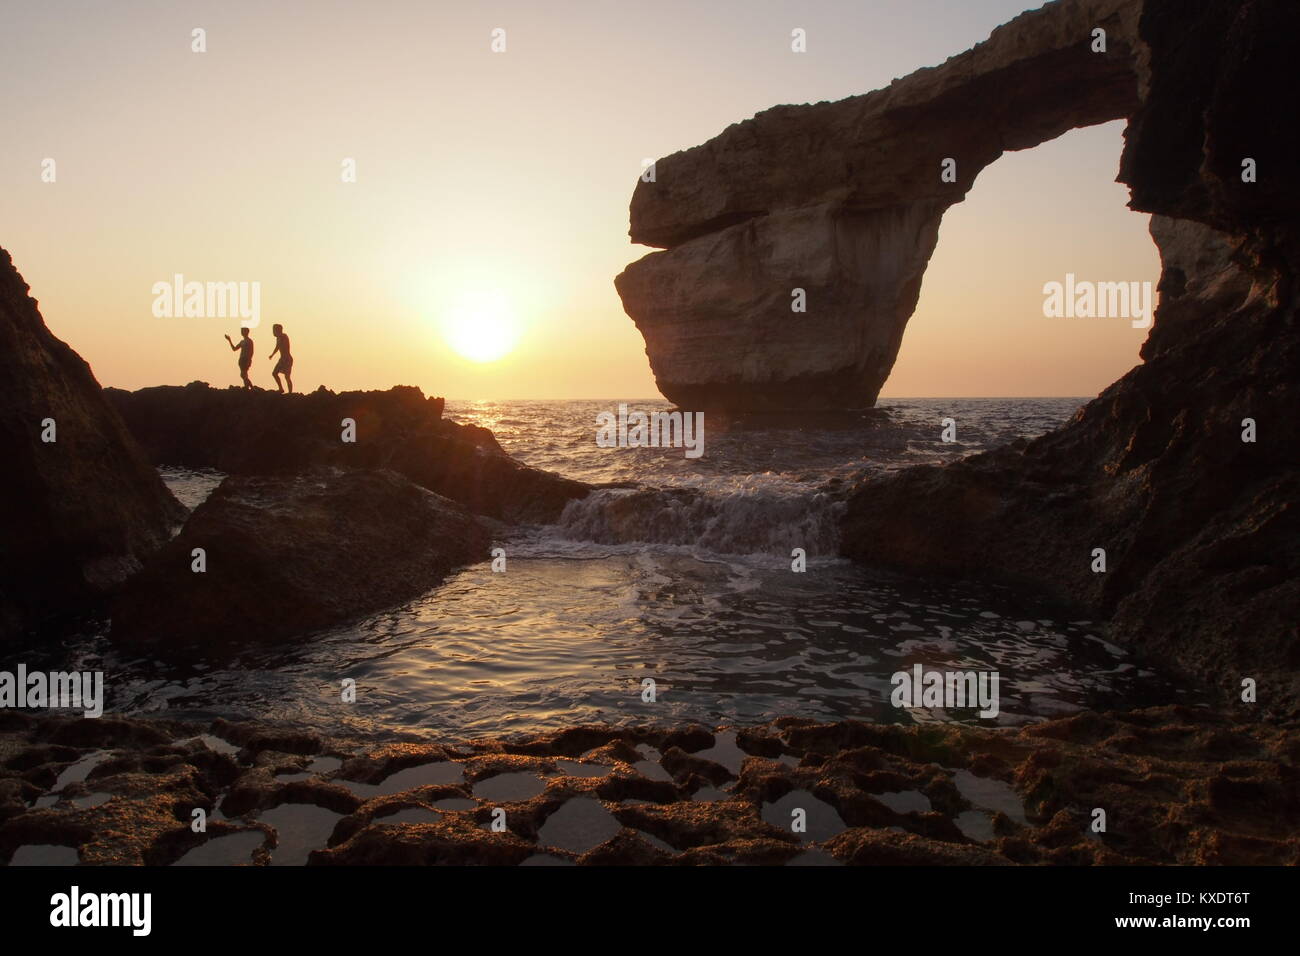 Toursists having fun in Dwerja Bay with the famous Azure Window in the background at sunset, Gozo, Malta Stock Photo